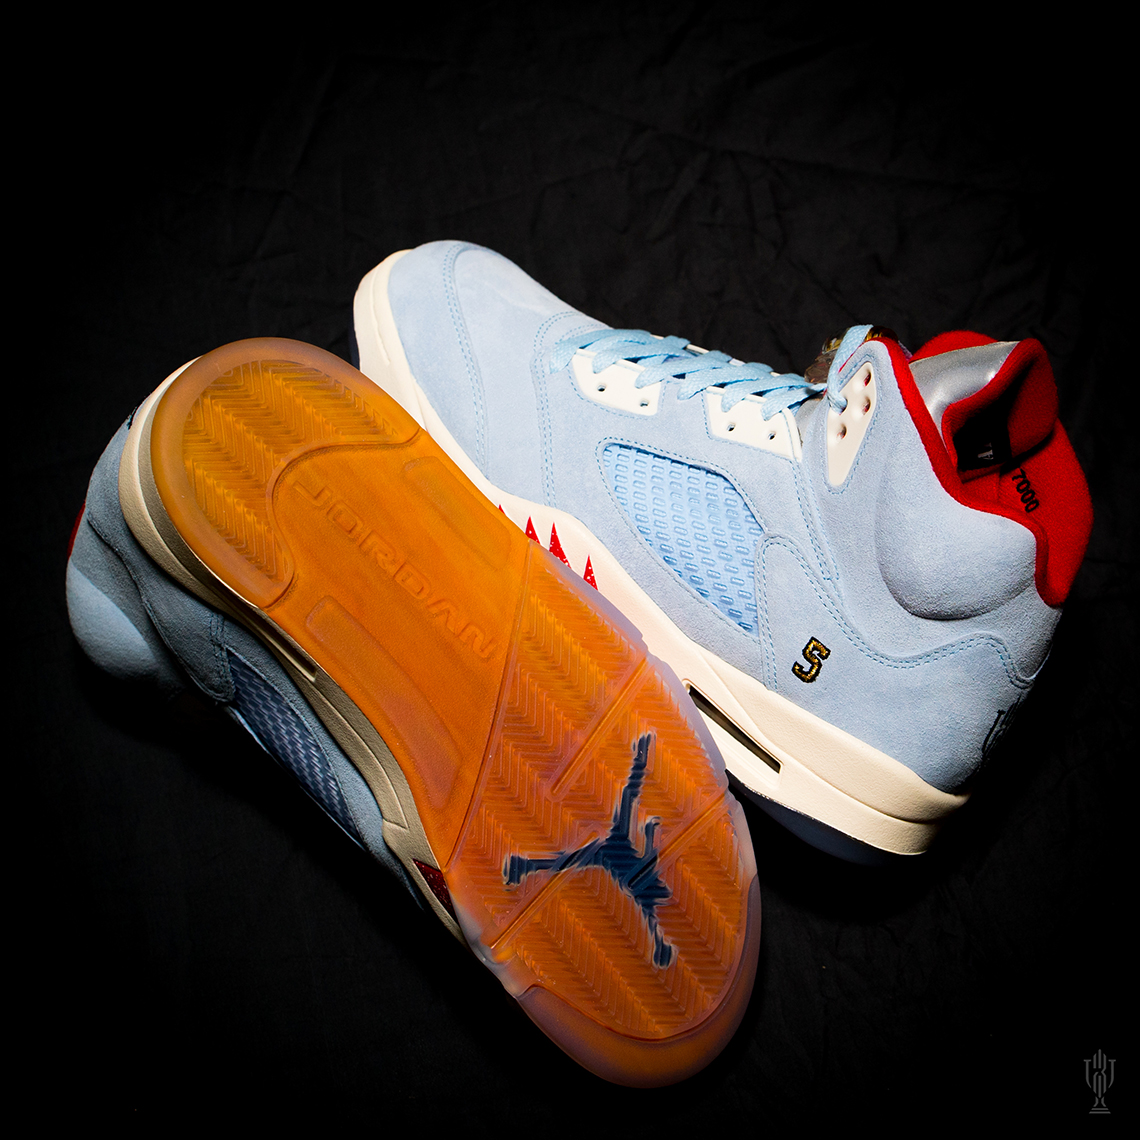 Trophy Room Air jordan 5 retro Brand fire red silver tongue 2020 gs Ice Blue 6